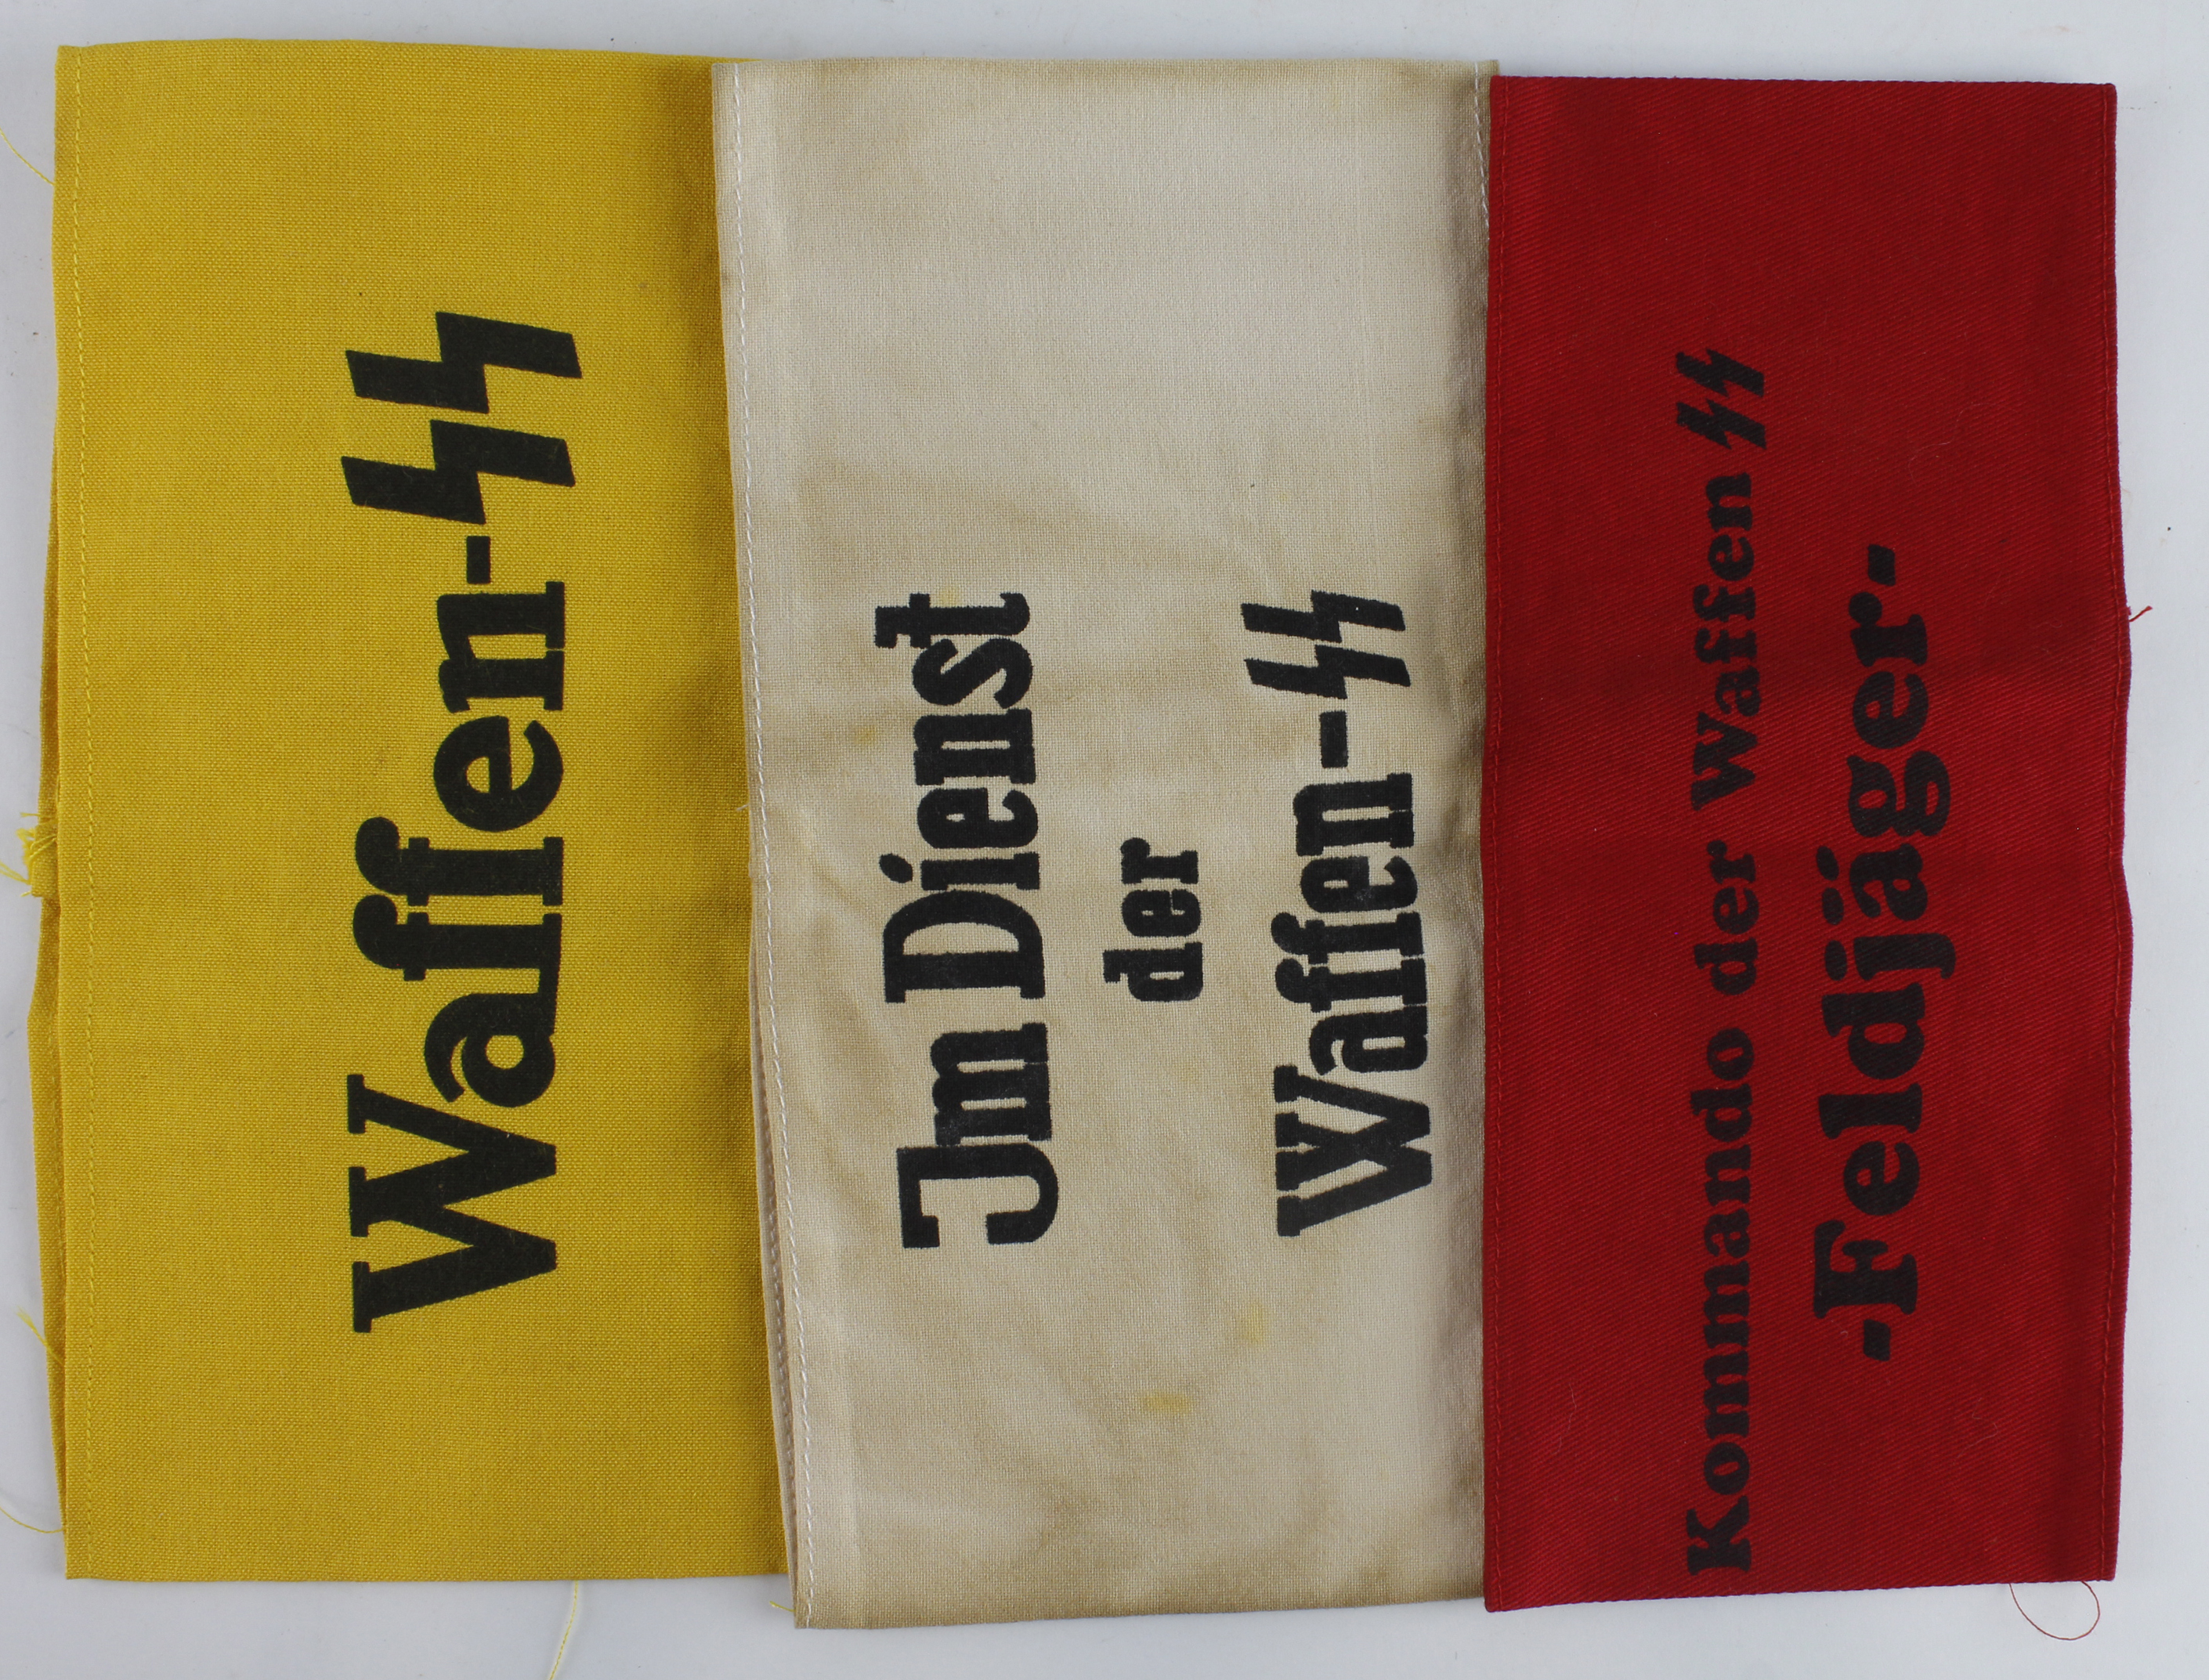 German Waffen SS armbands 3x different helpers types.